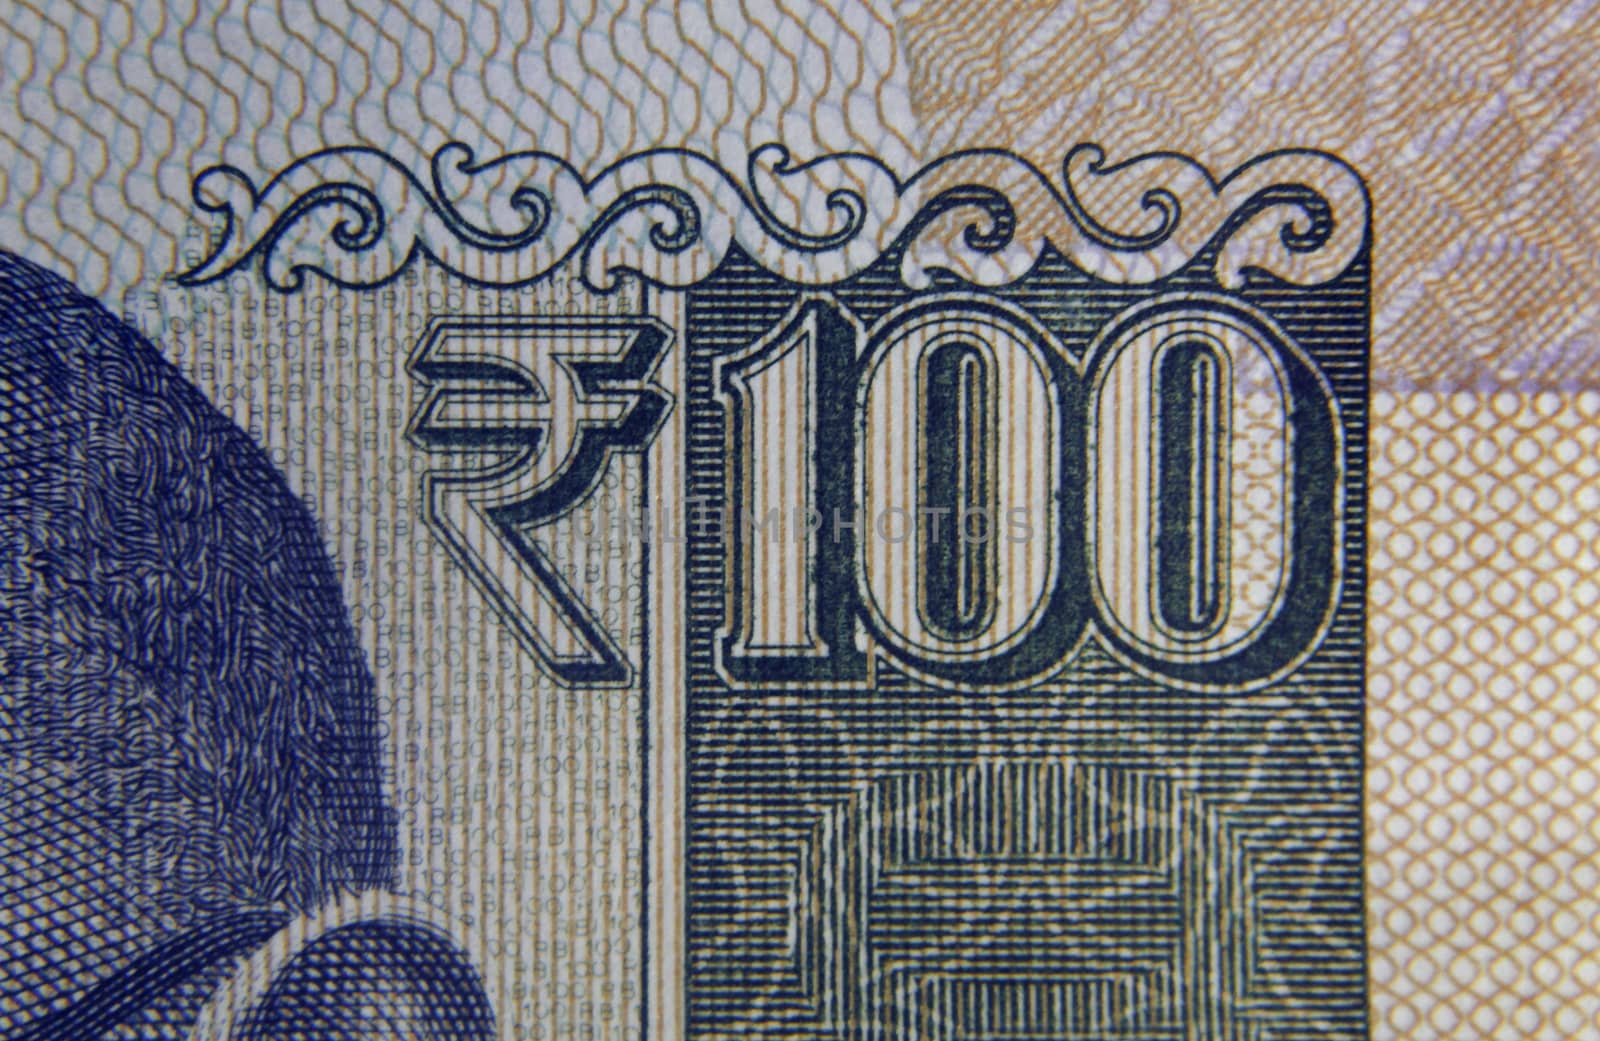 Rupee Symbol on Hundred rupee banknote by yands